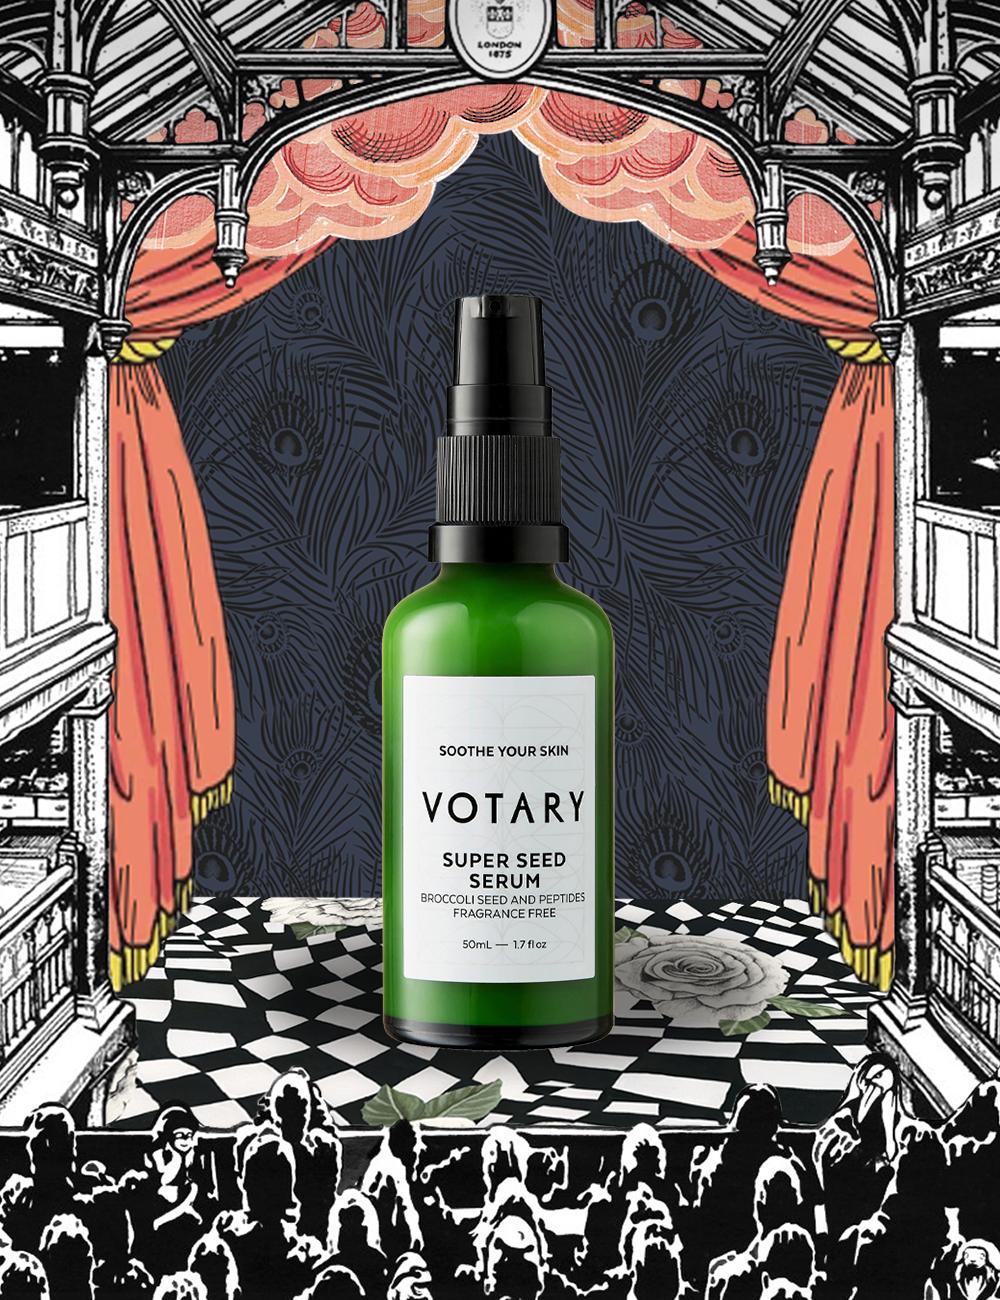 Votary Super Seed Serum Review